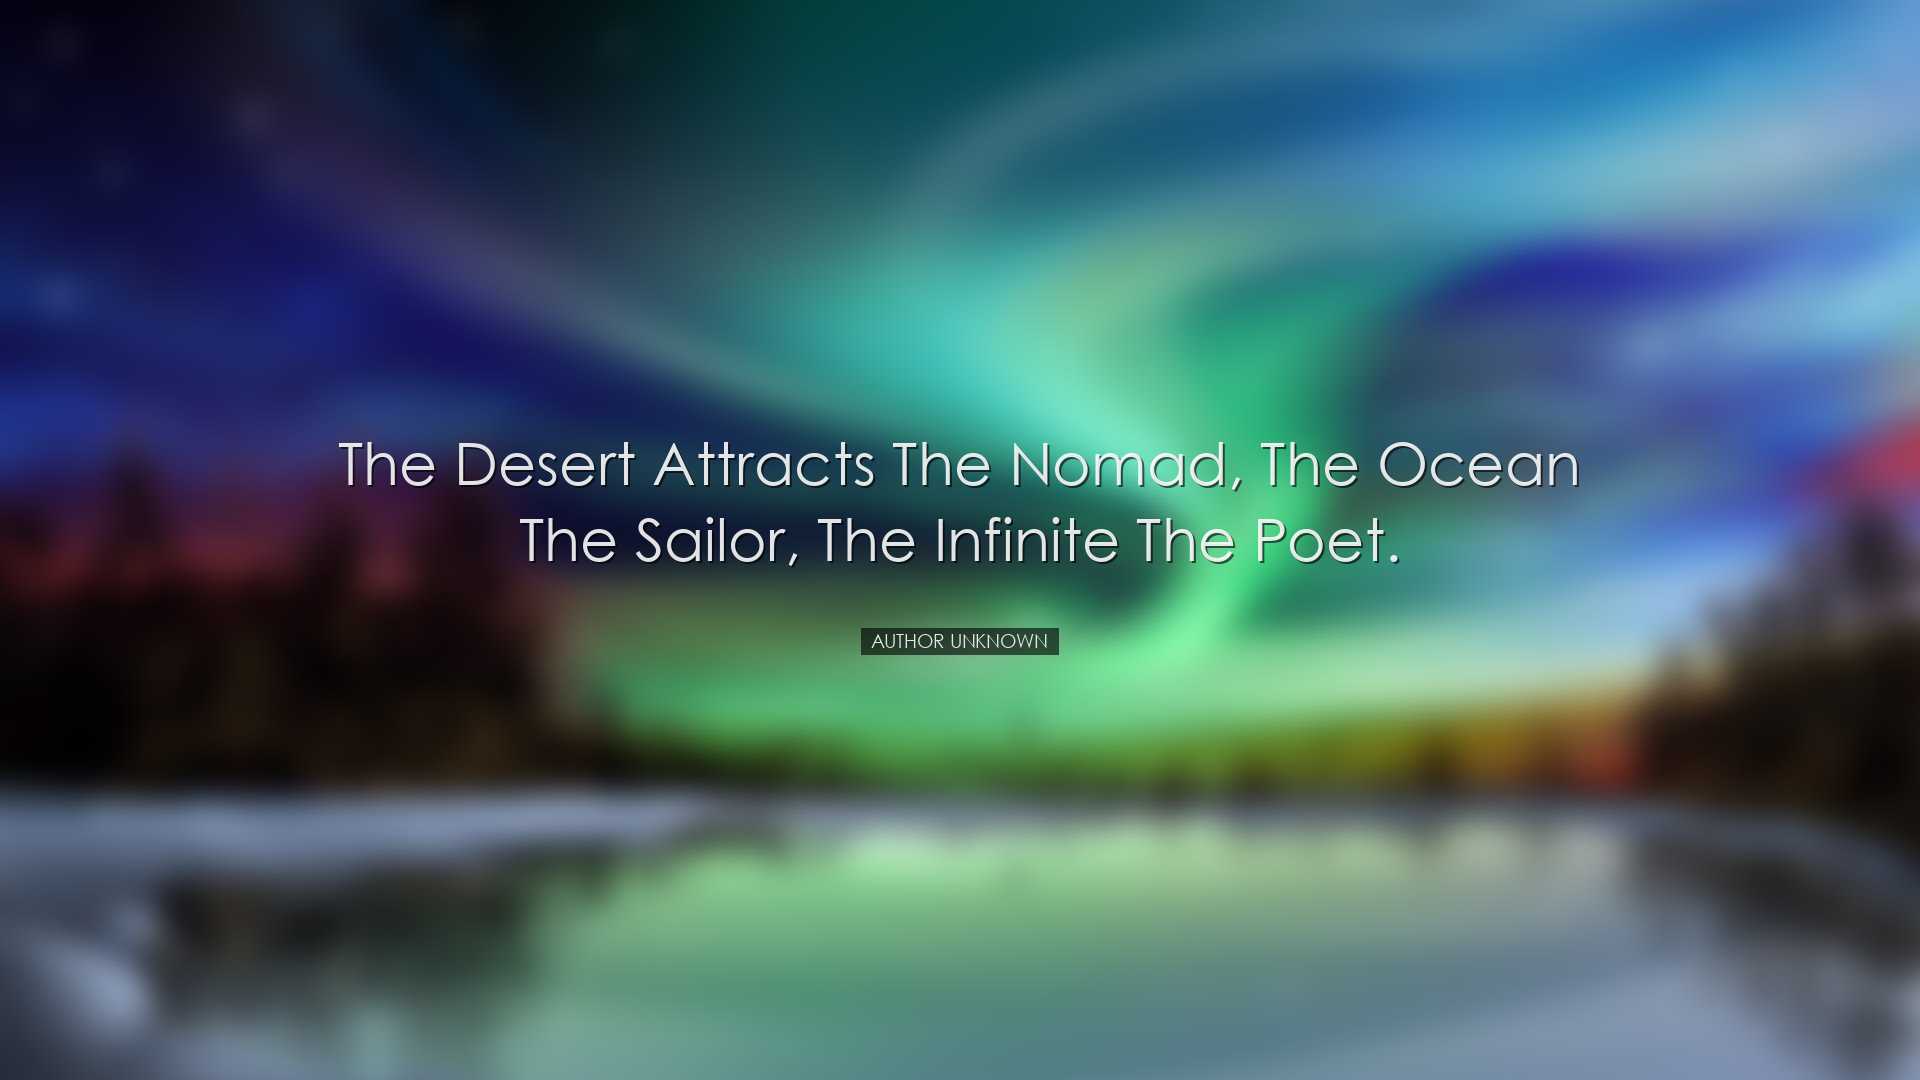 The desert attracts the nomad, the ocean the sailor, the infinite